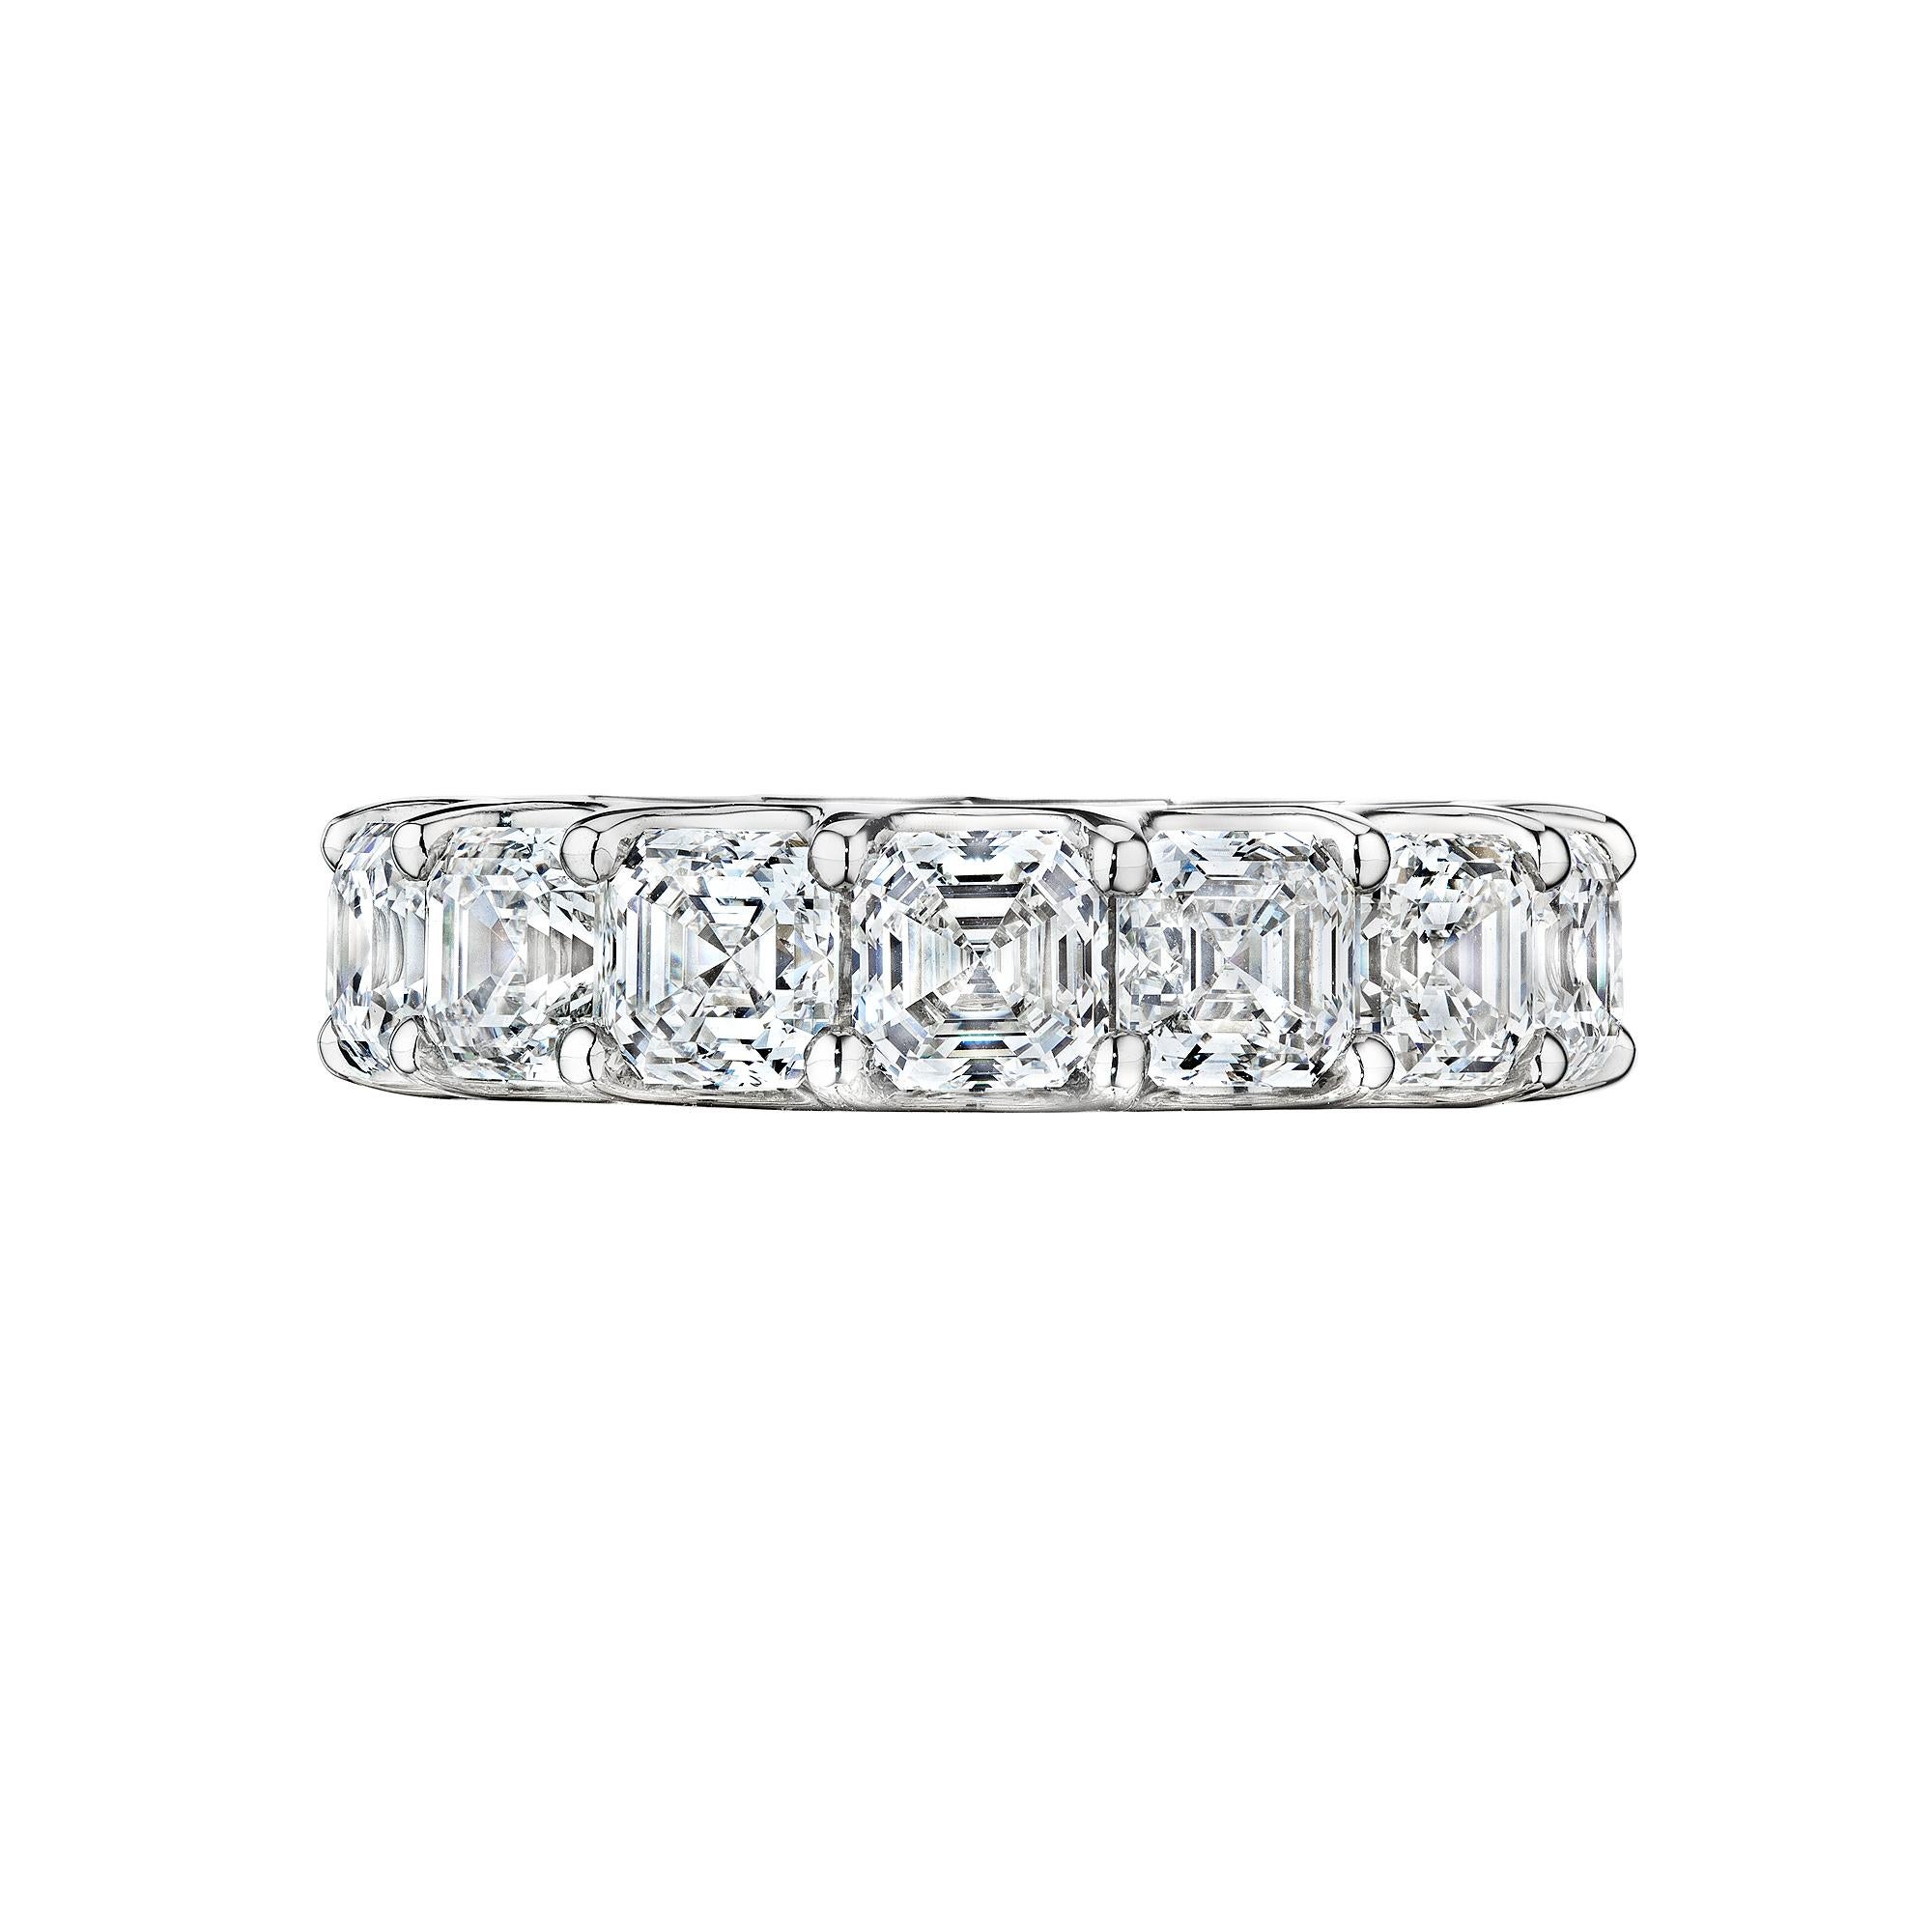 Immerse yourself in this luminous and uncompromising Asscher cut diamond platinum eternity band.  With 15 extraordinary Asscher cut diamonds, each GIA certified, this shared prong platinum eternity band is enchanting.  Total diamond weight is 7.99. 